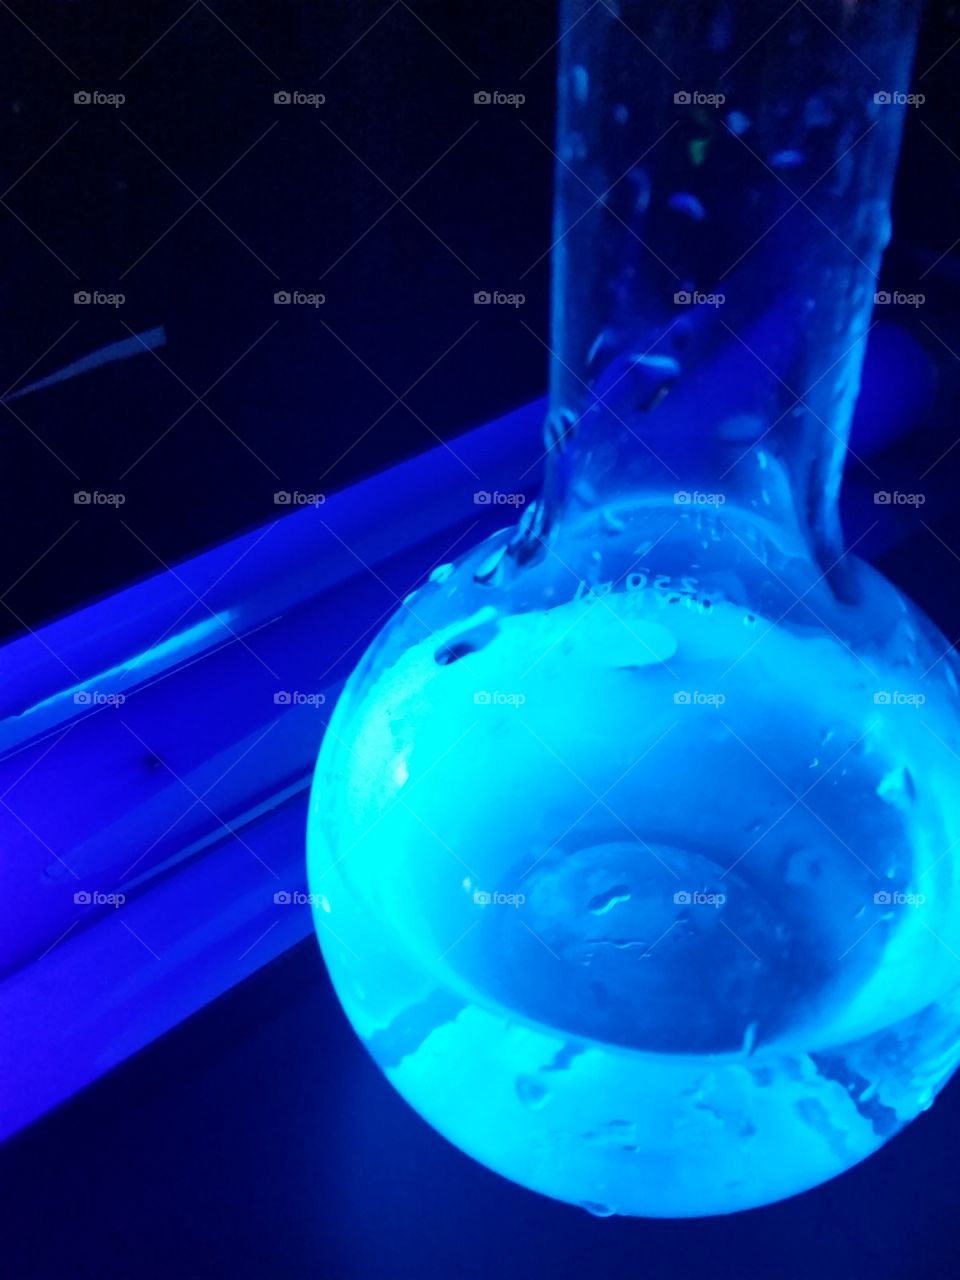 glowing chemiluminescence from quinine under blacklight. This photo is not filtered in any way! The beauty of science!